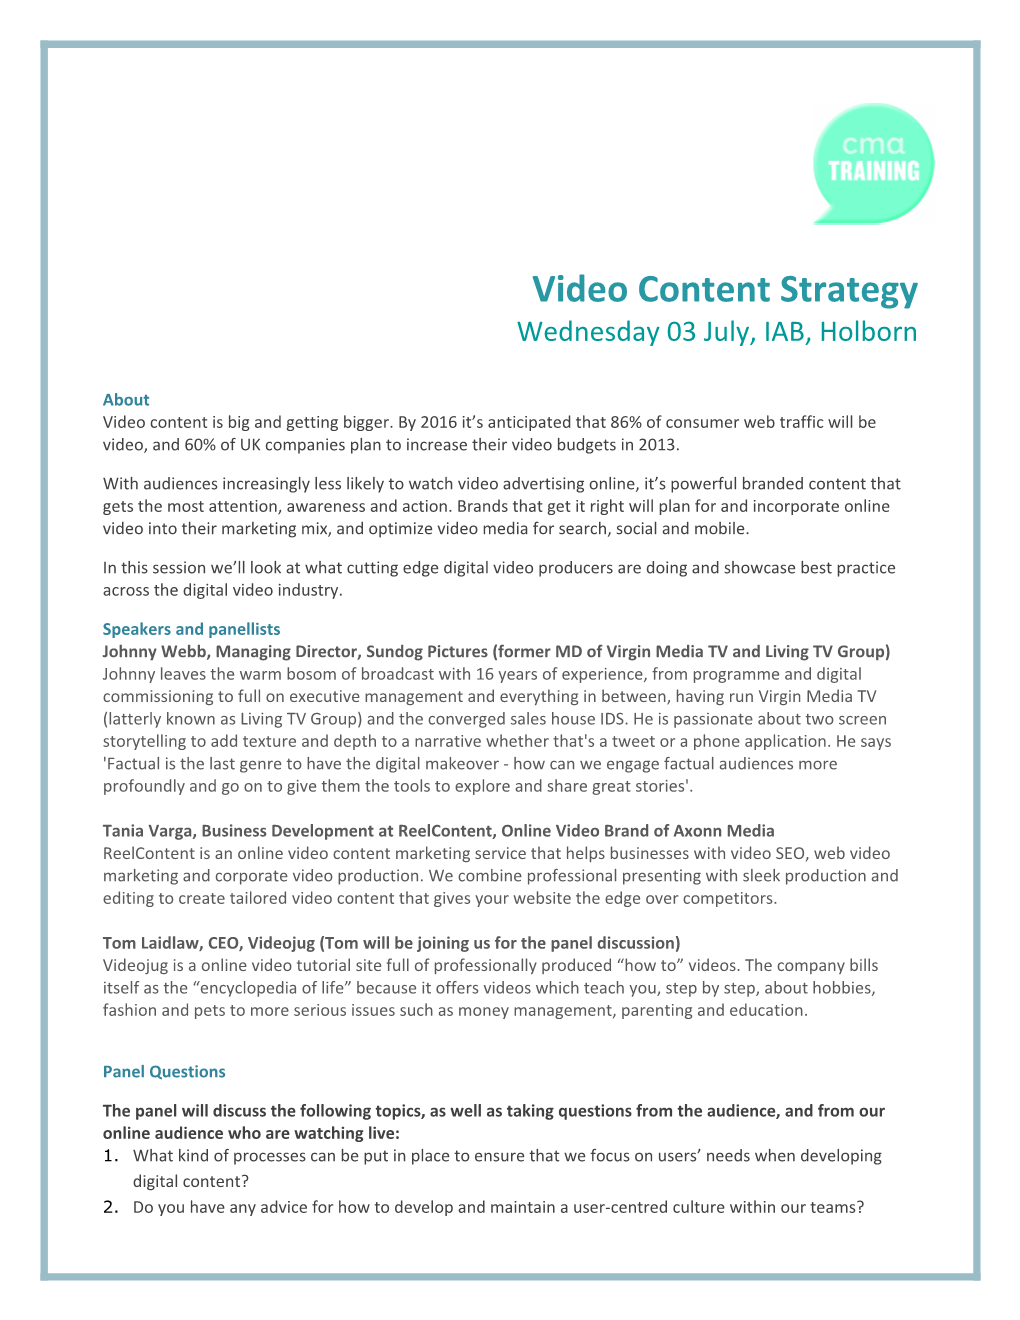 Video Content Strategy Wednesday 03 July, IAB, Holborn